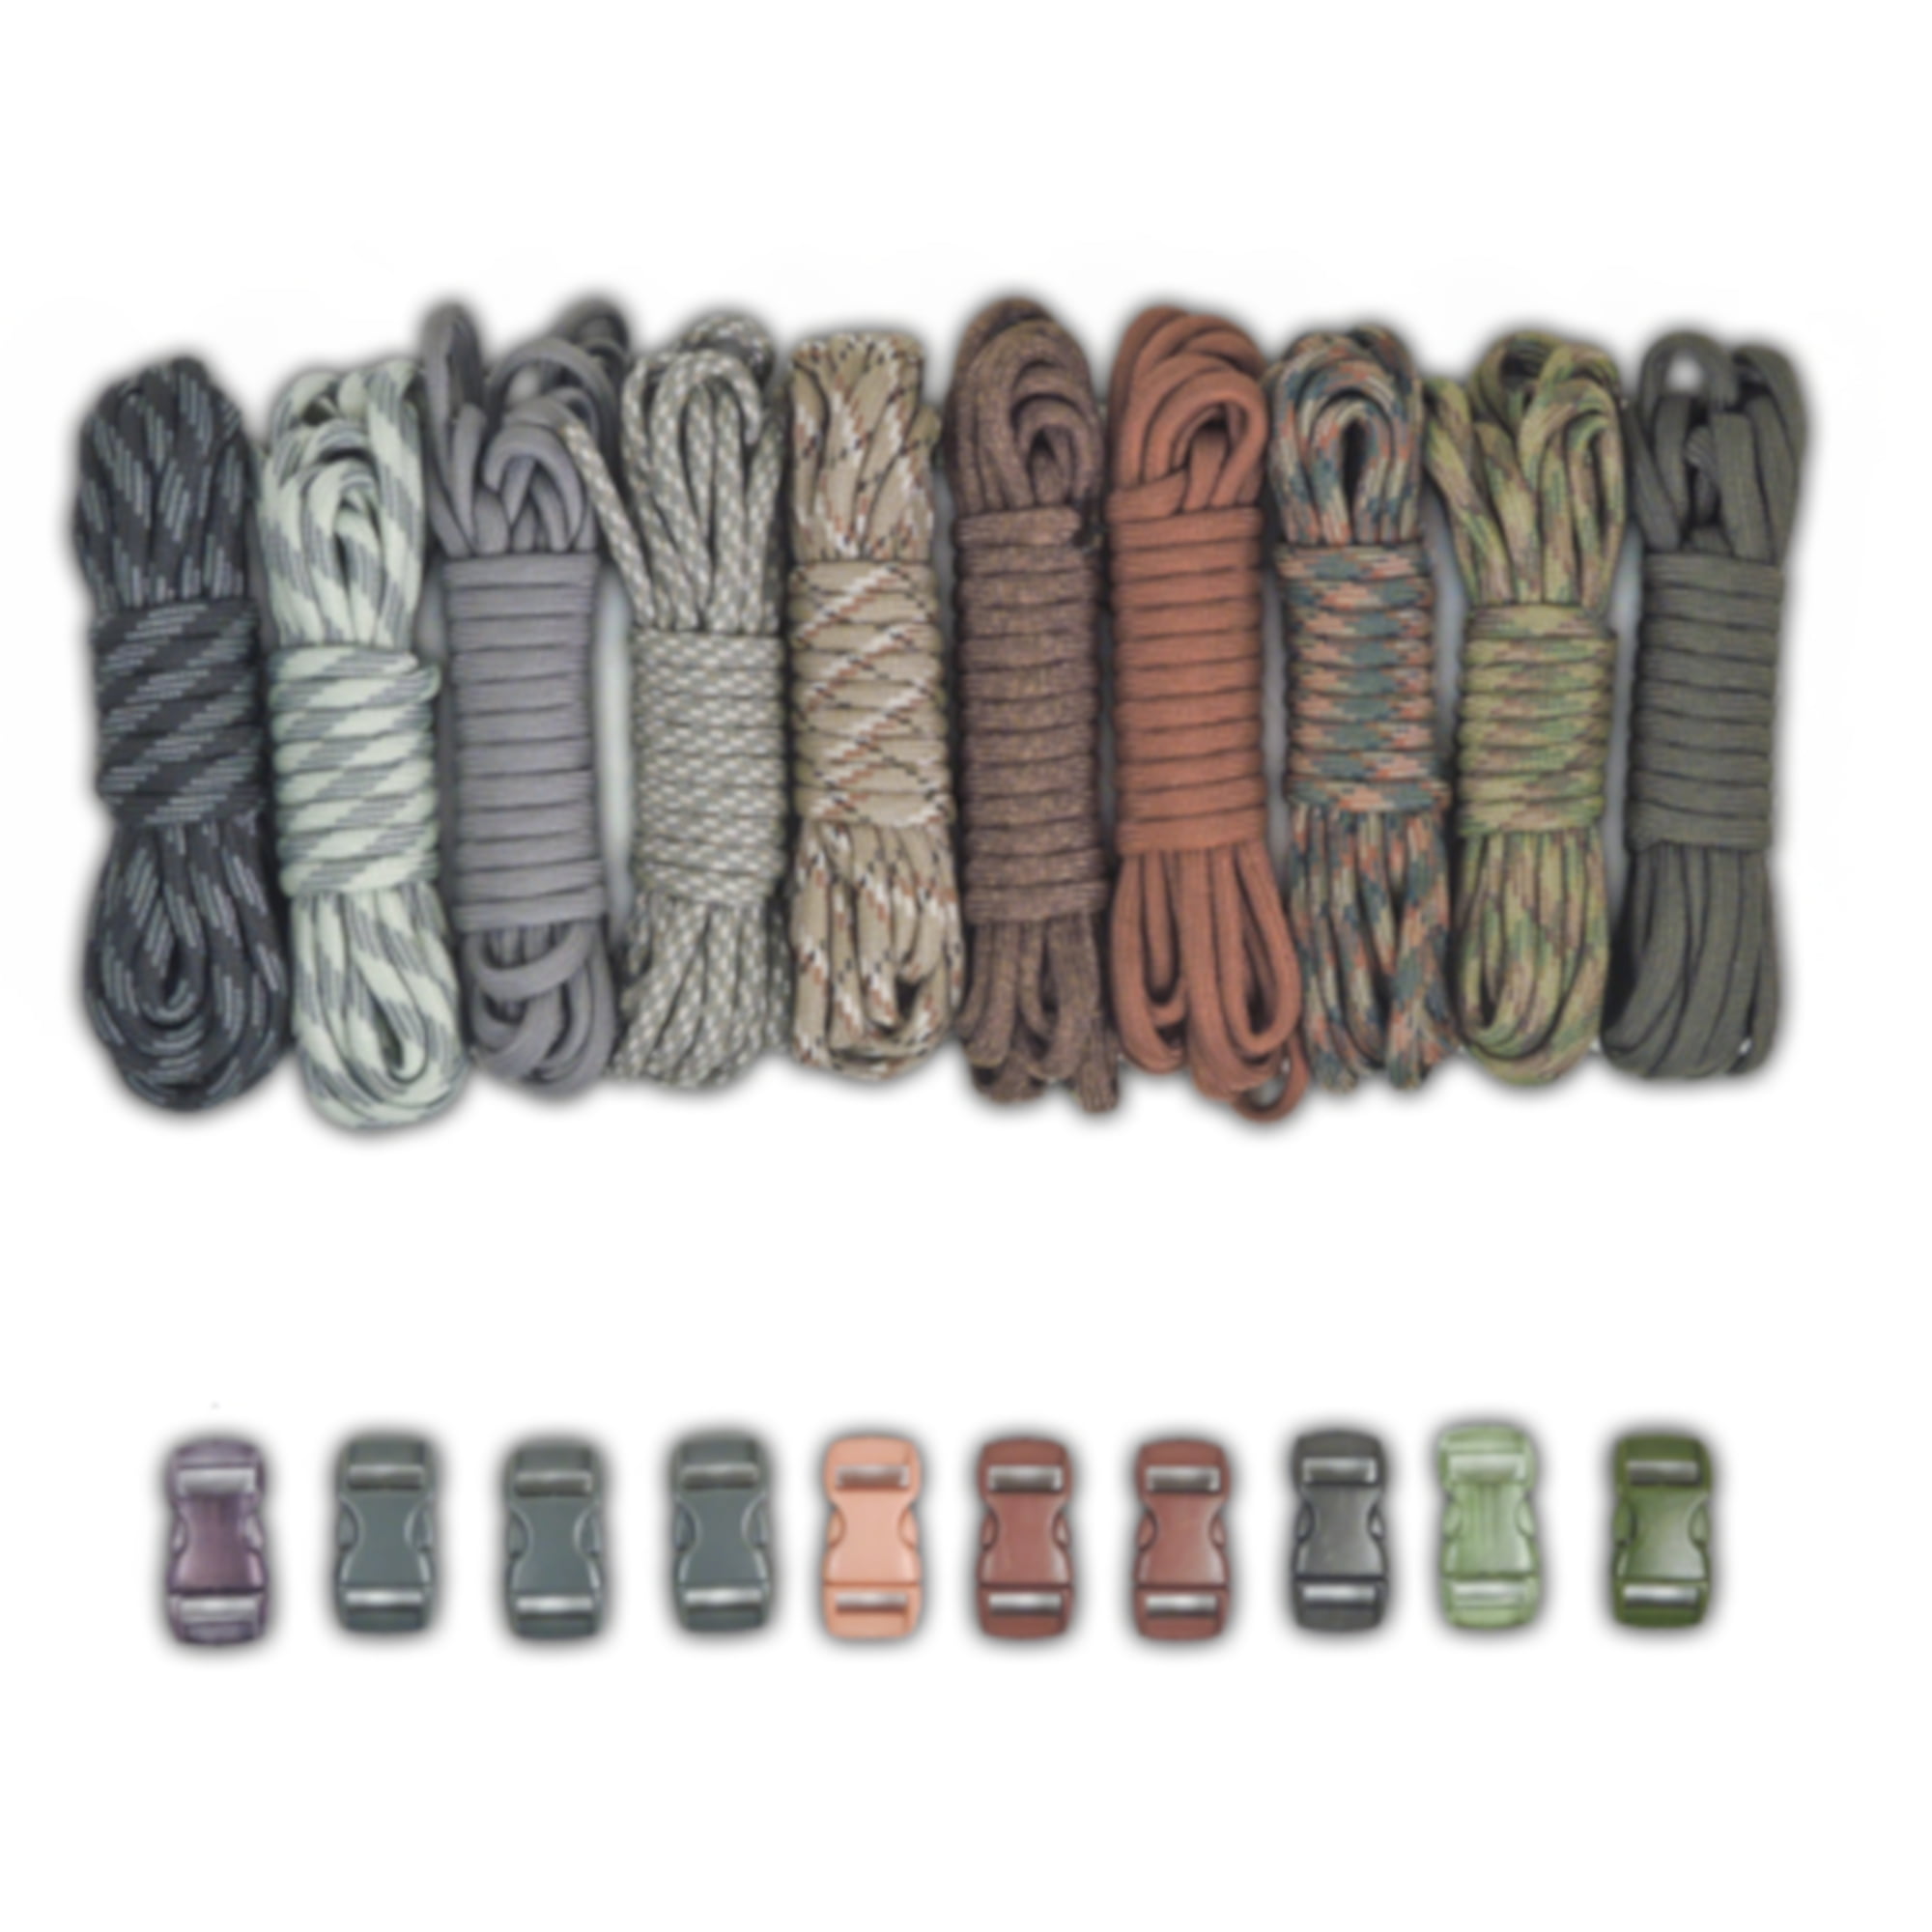 Paracord Survival Rope Bracelet Kit with 300 Feet 550 lb Para Cord & 30 Buckles 